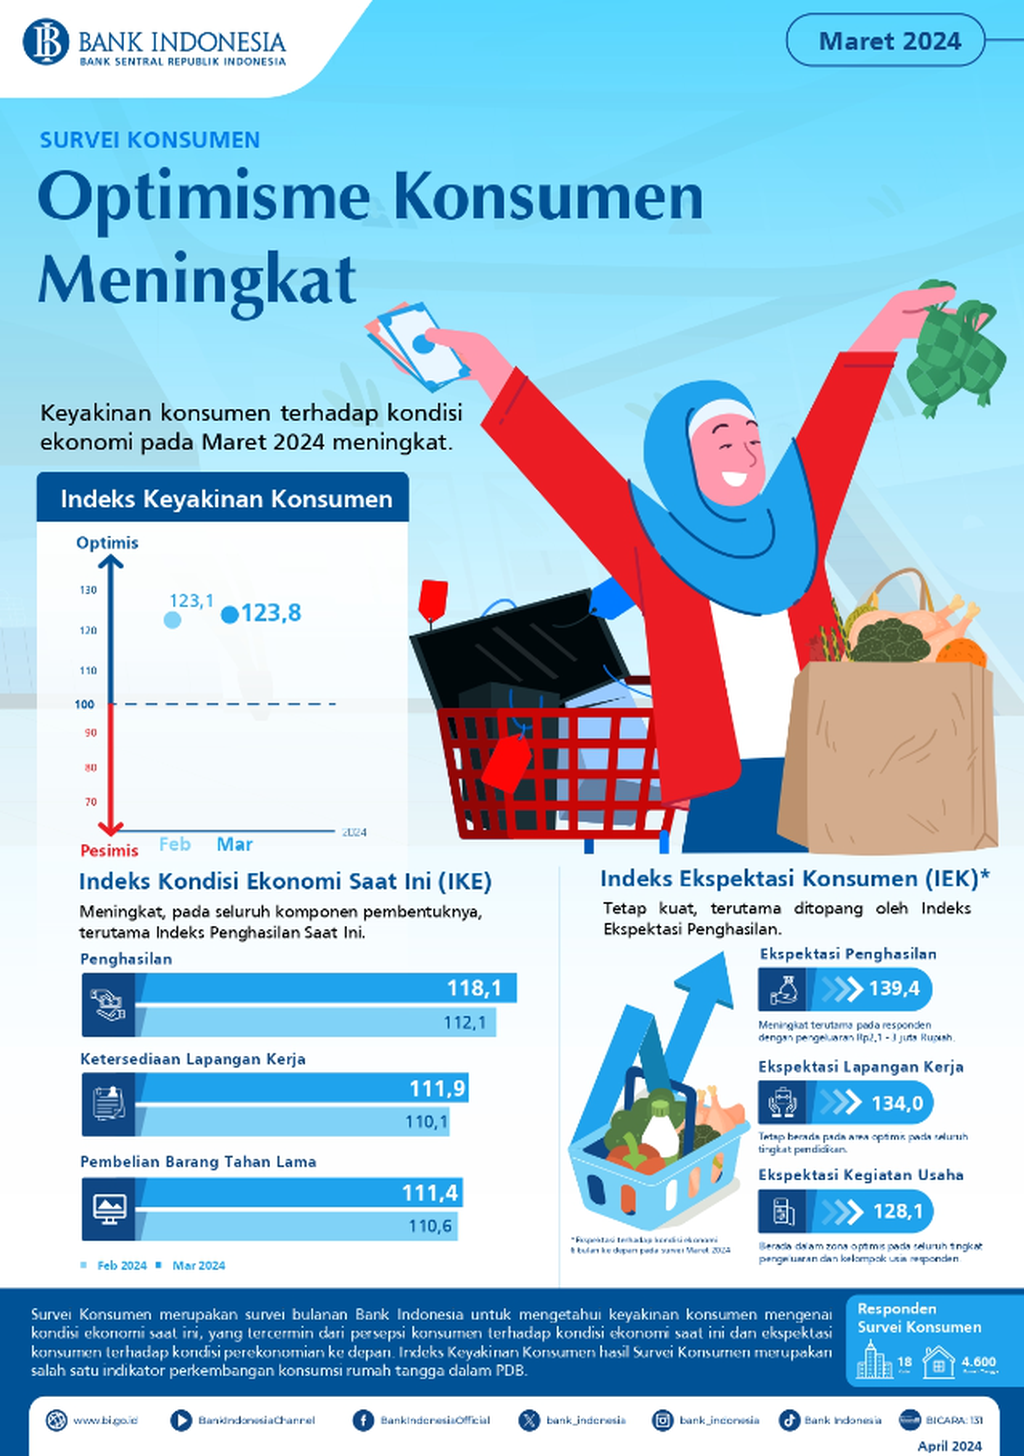 The results of Bank Indonesia's Consumer Survey in March 2024 showed an increase in consumer confidence by 123.8 basis points. Source: Bank Indonesia.